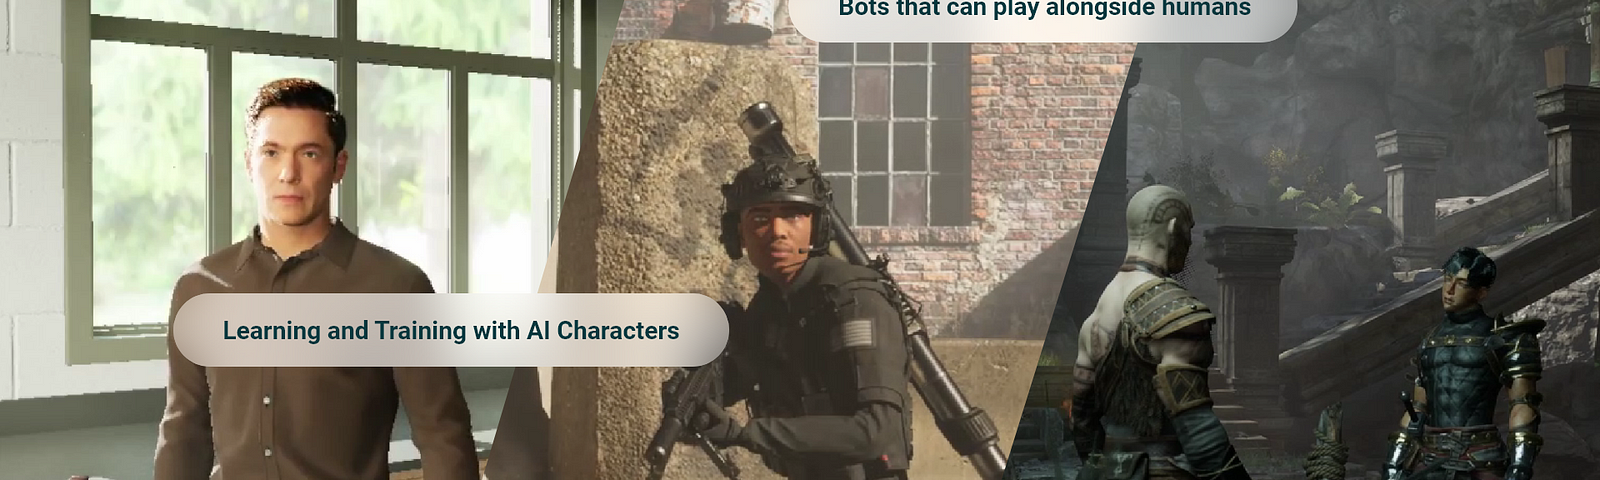 AI characters for various use cases from learning and training to Role-playing and First person shooter games.